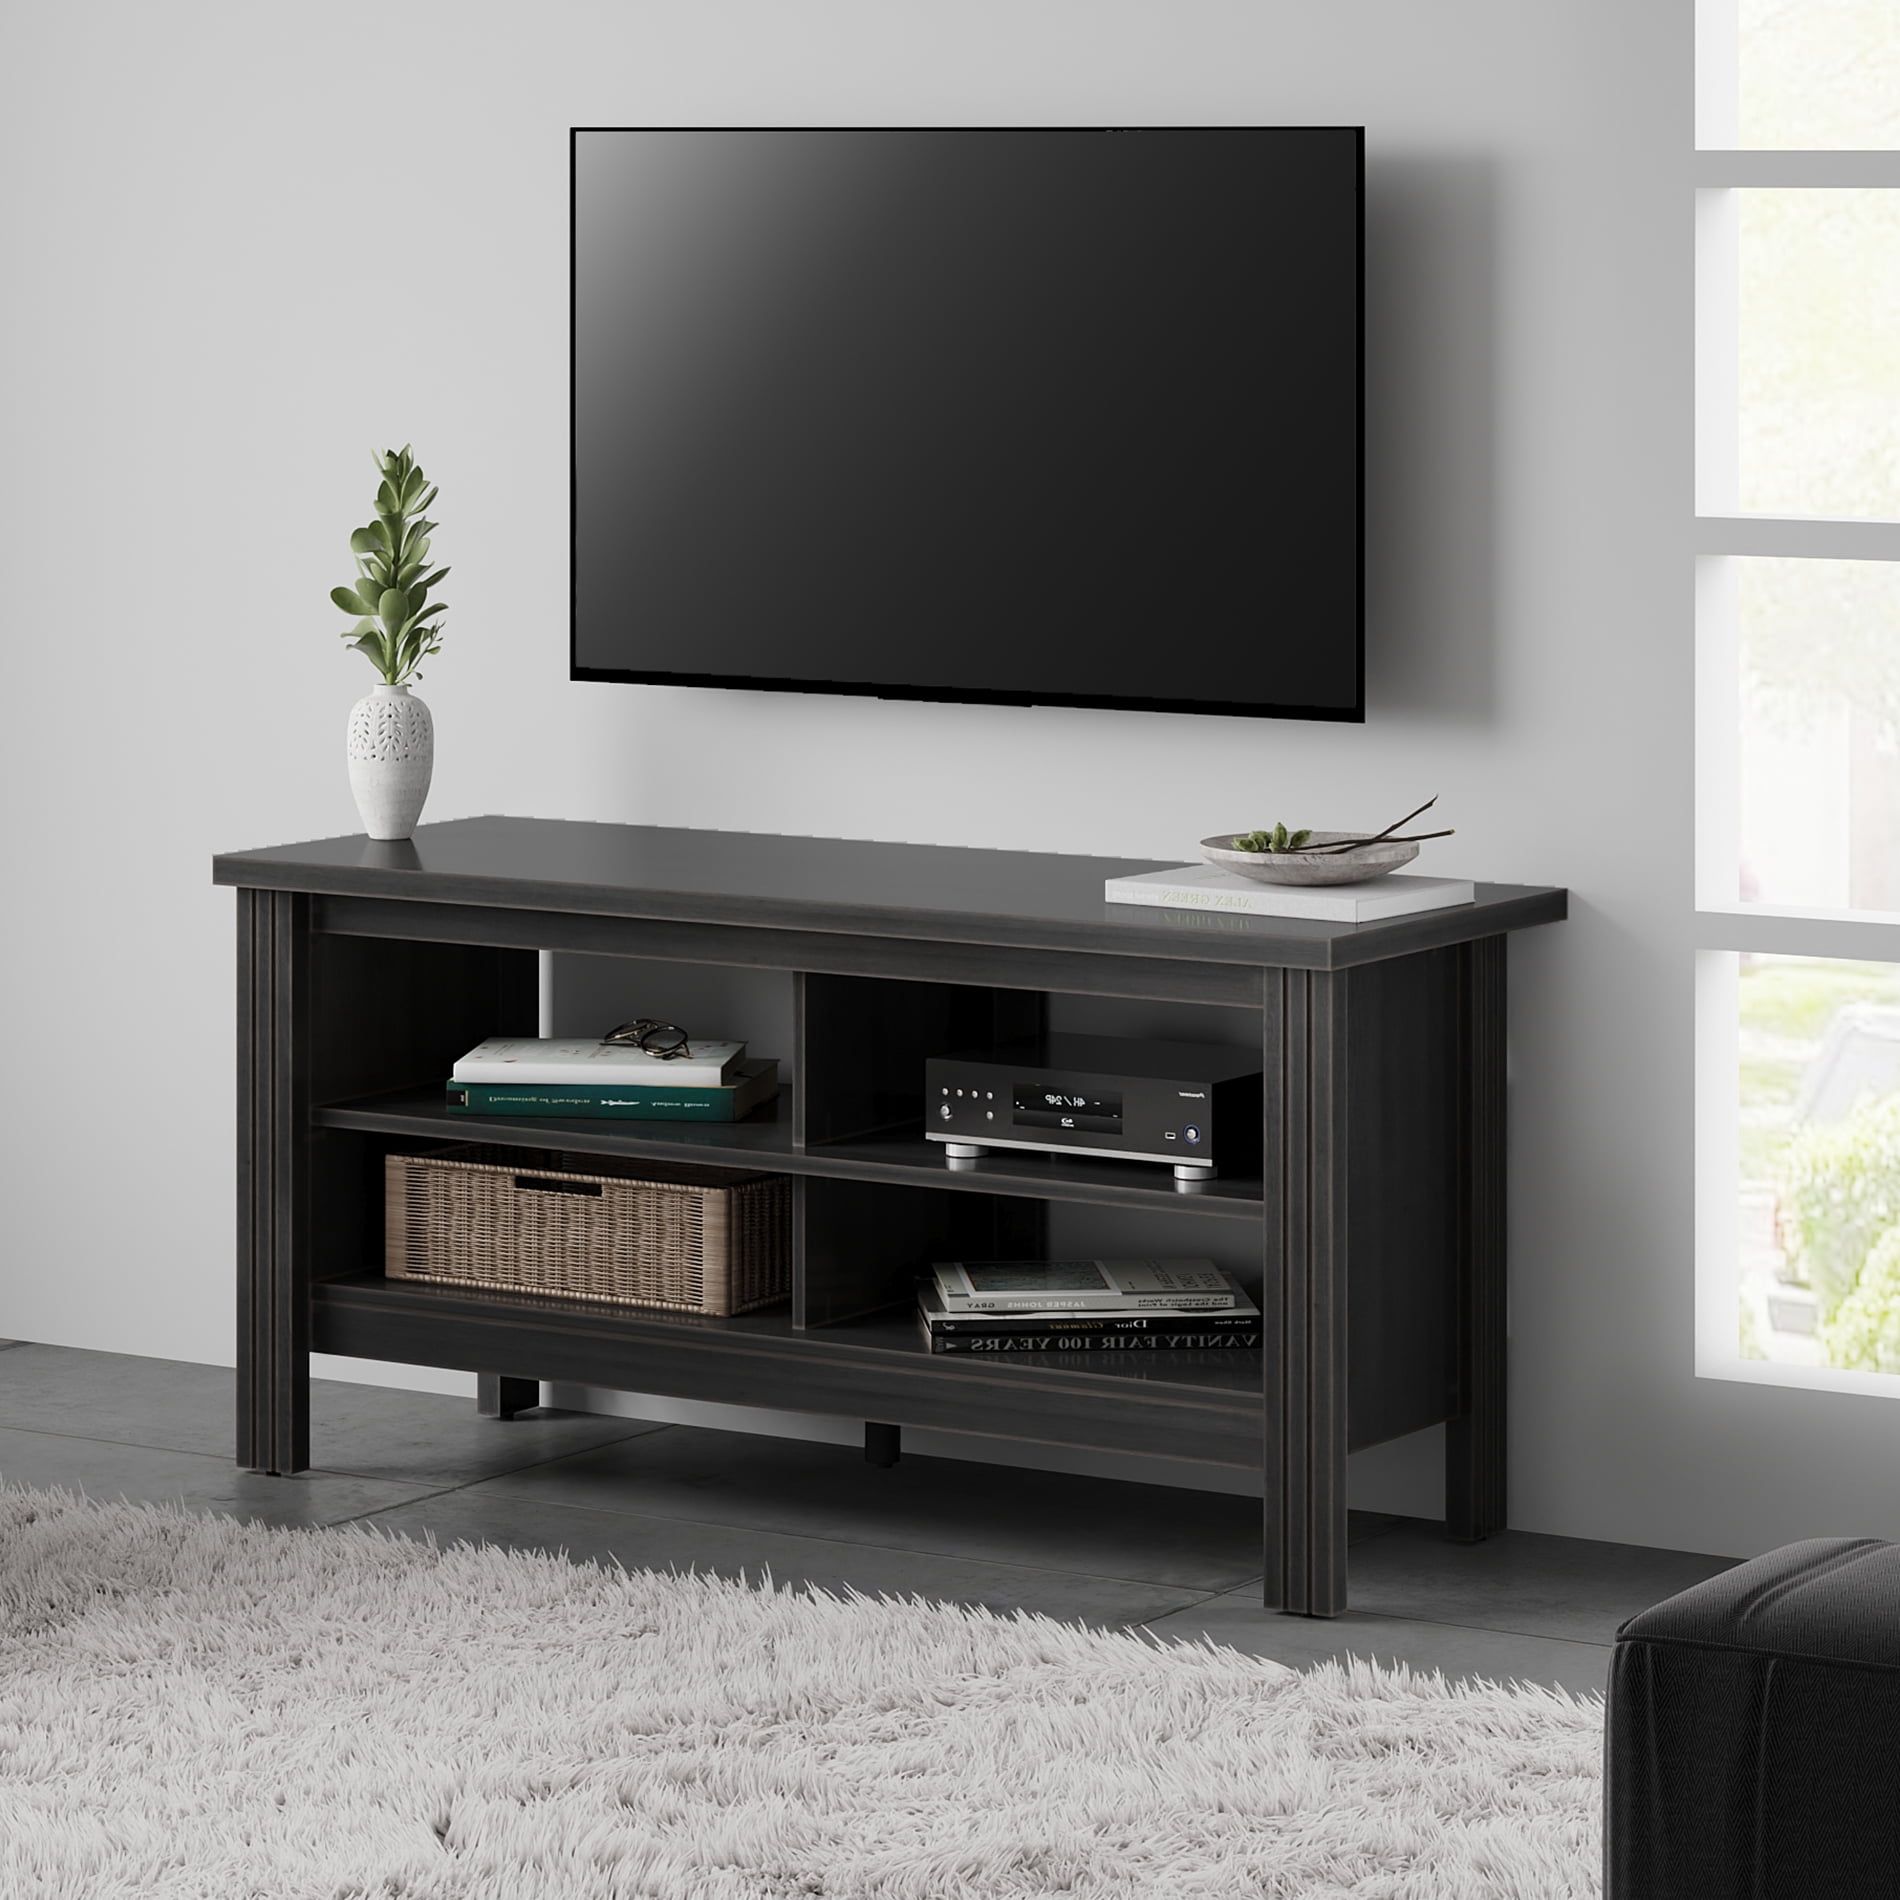 Farmhouse Wood Tv Stands For 55 Inch Flat Screen Media Console Storage Inside Media Entertainment Center Tv Stands (Gallery 15 of 20)